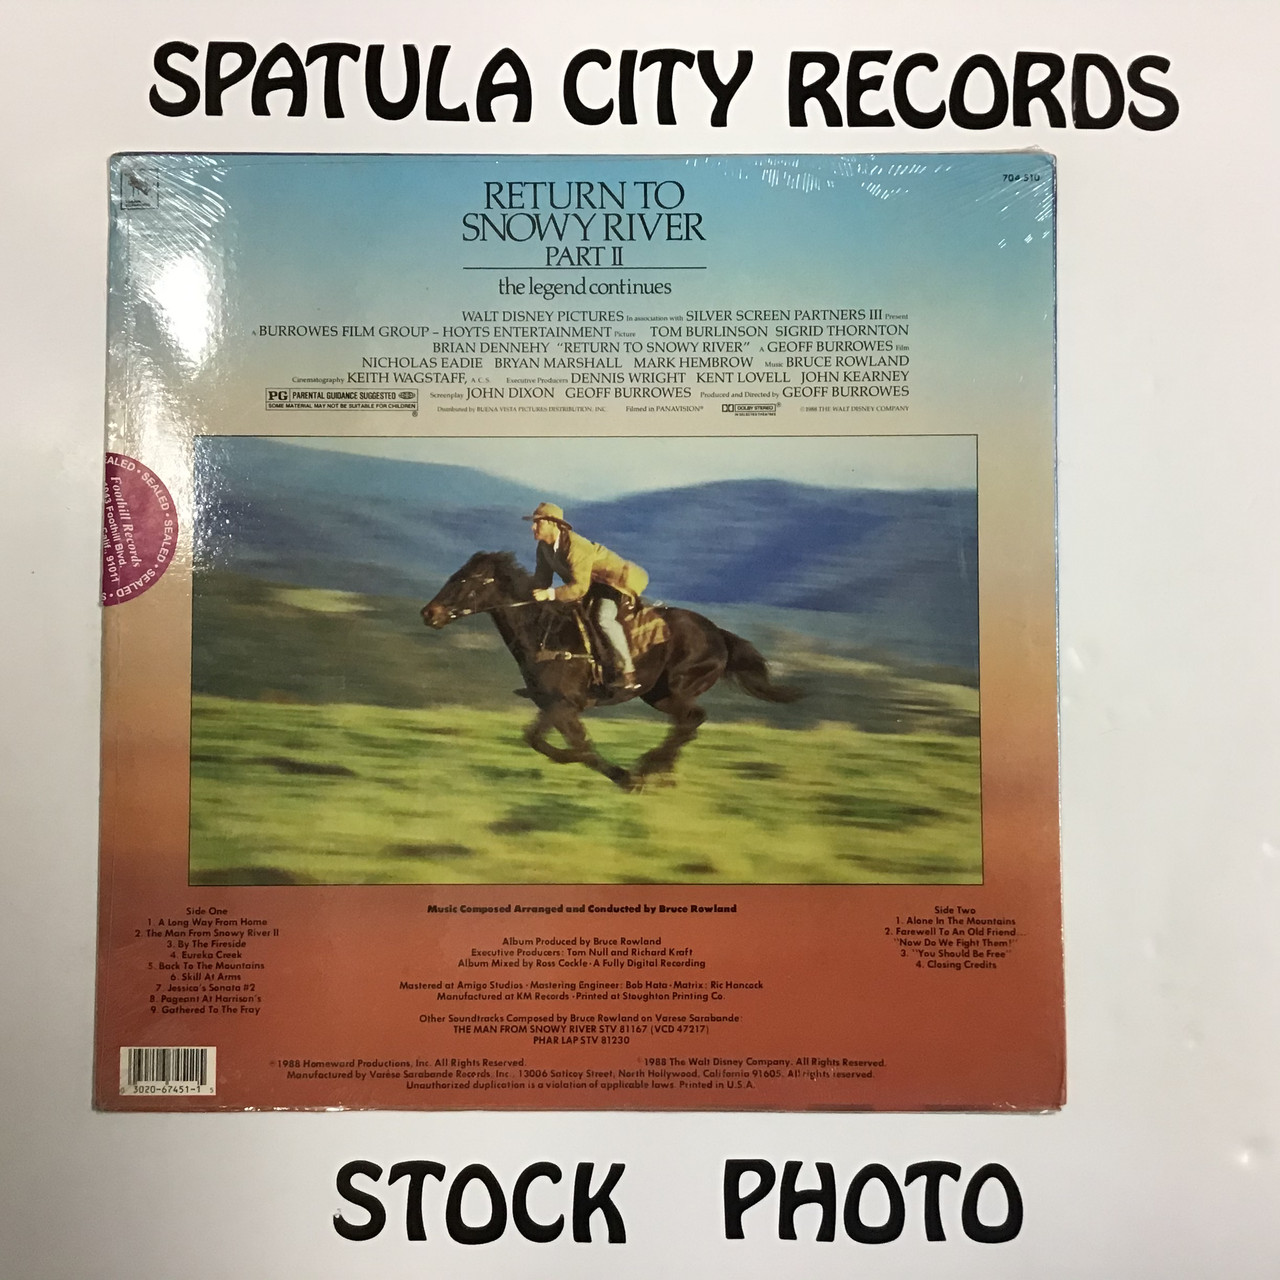 Bruce Rowland - Return to Snowy River Part II - Soundtrack - SEALED - vinyl record LP